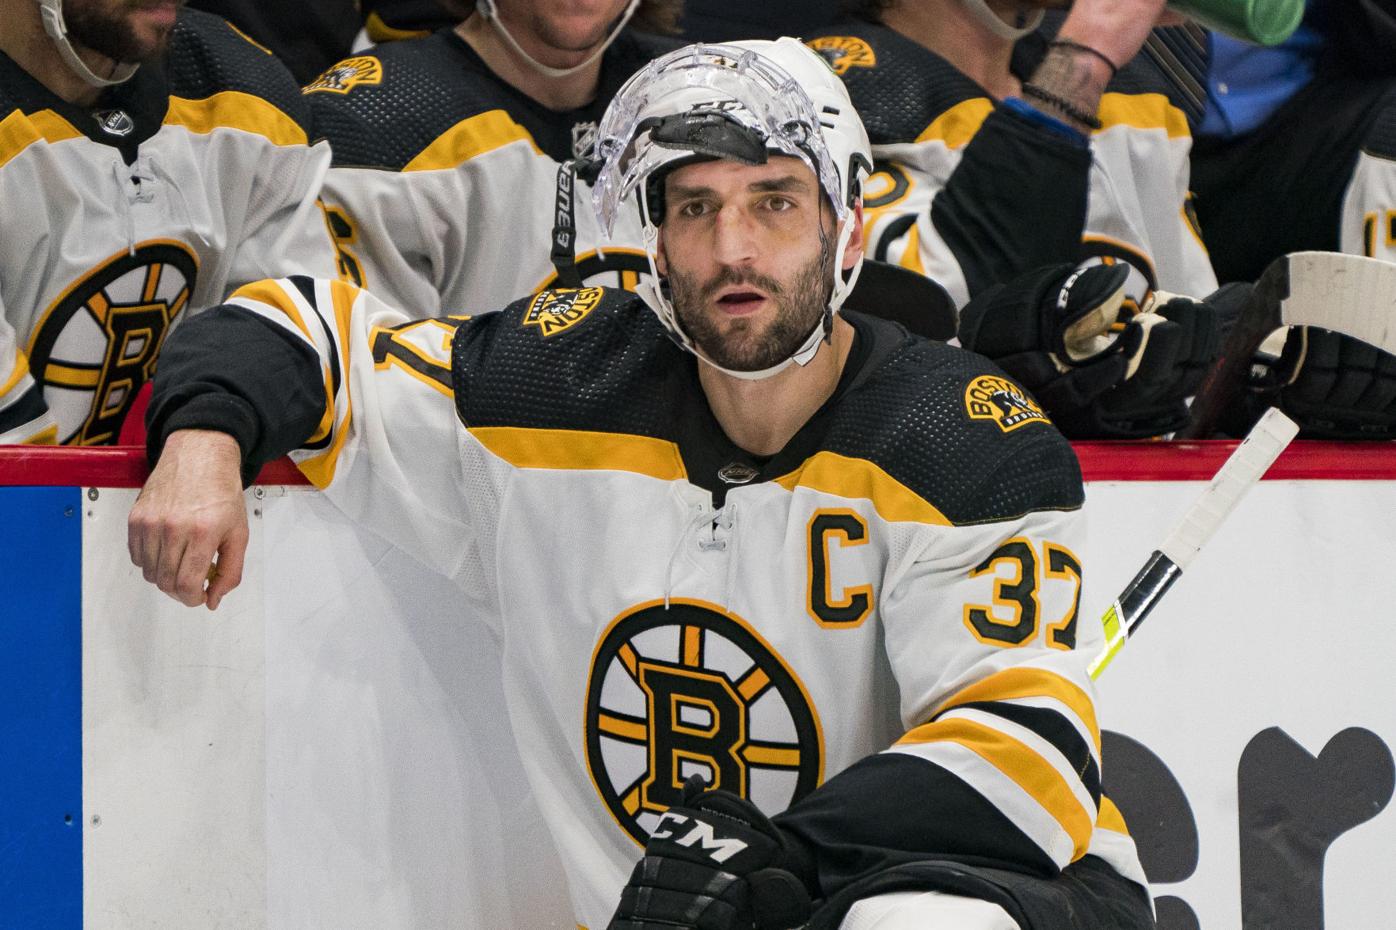 Patrice Bergeron retires: Looking back at top moments from